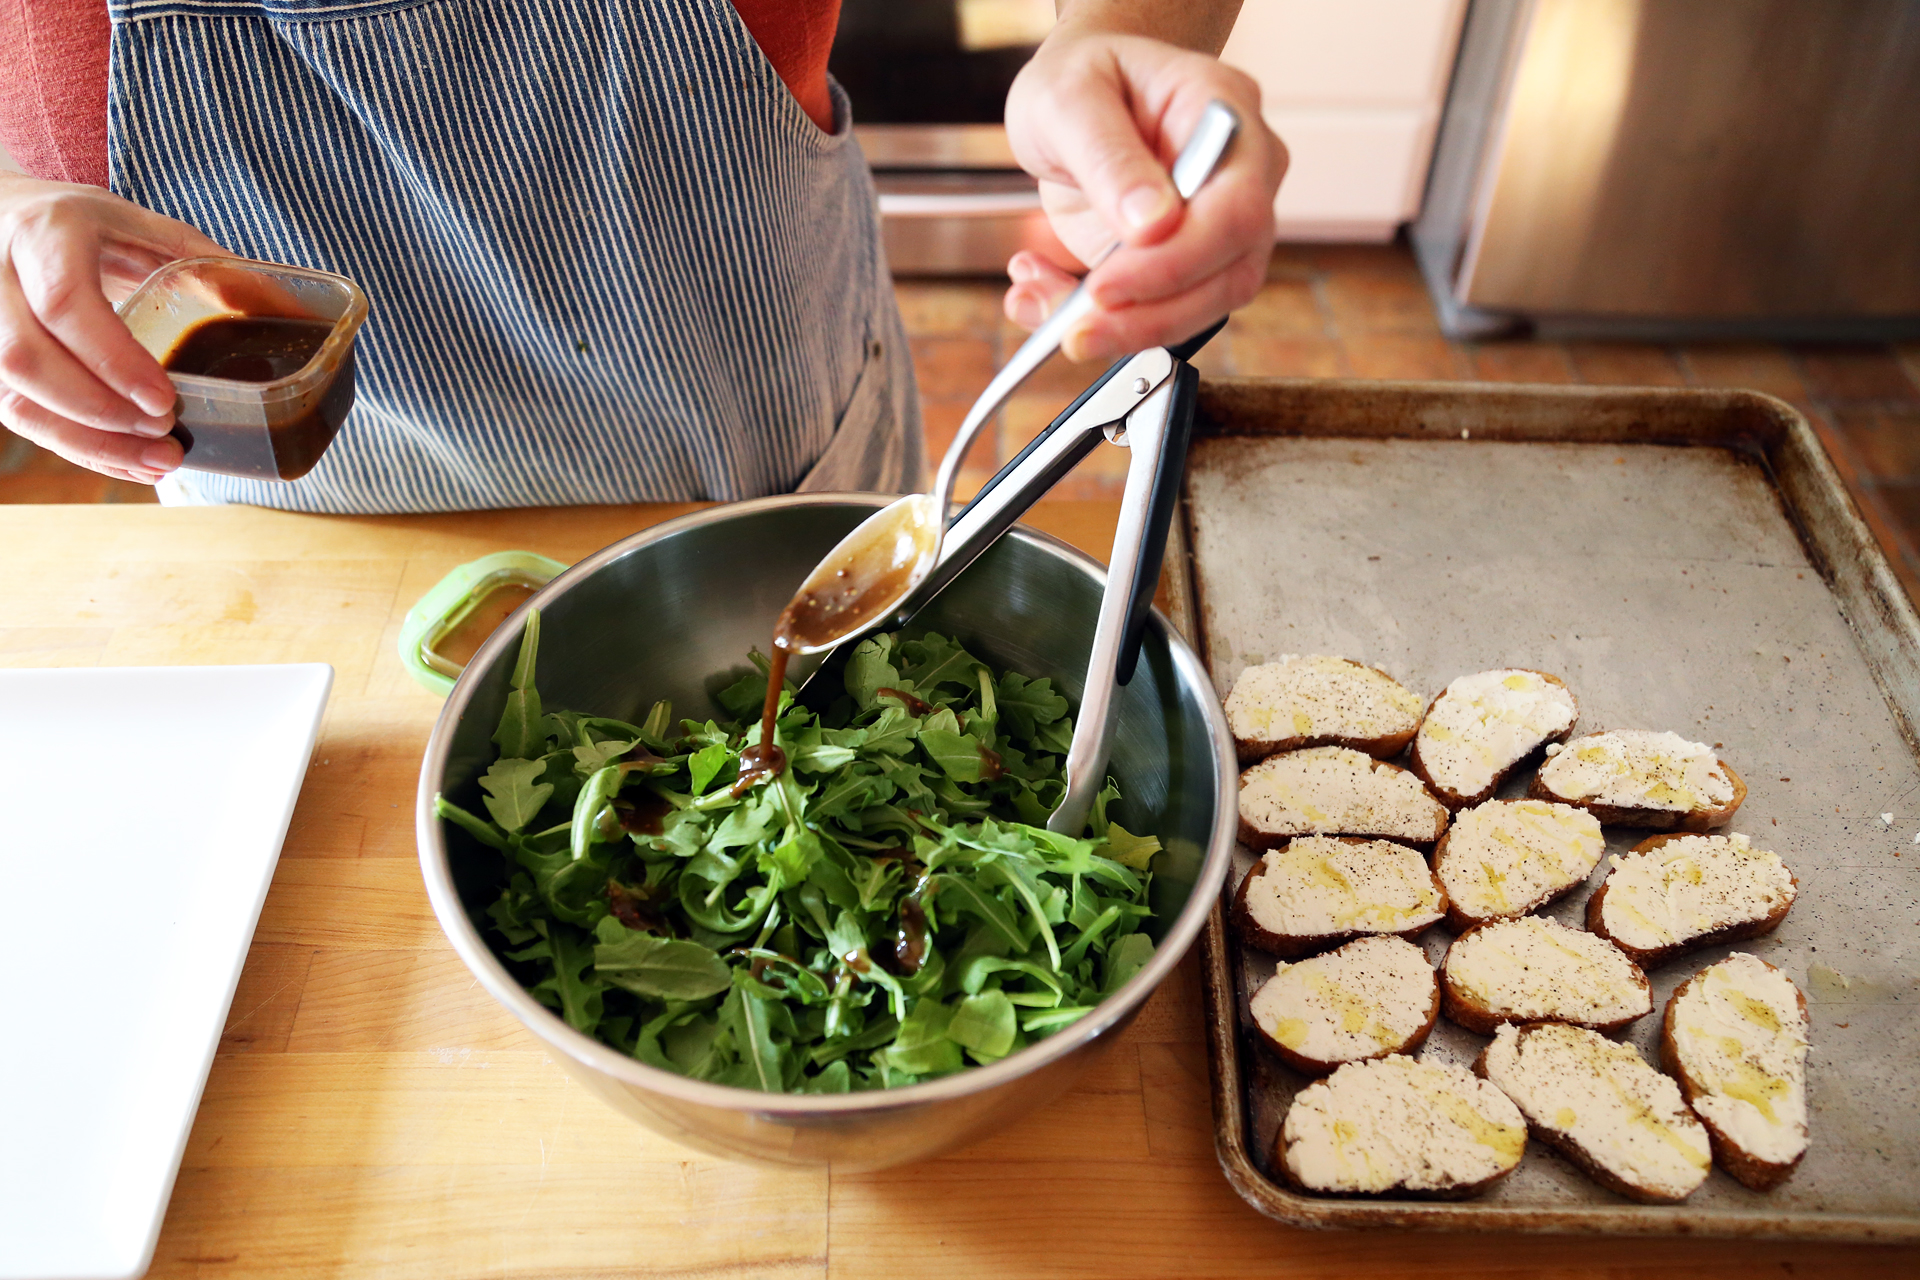 In a mixing bowl, toss the arugula with about 2 tbsp of the vinaigrette.